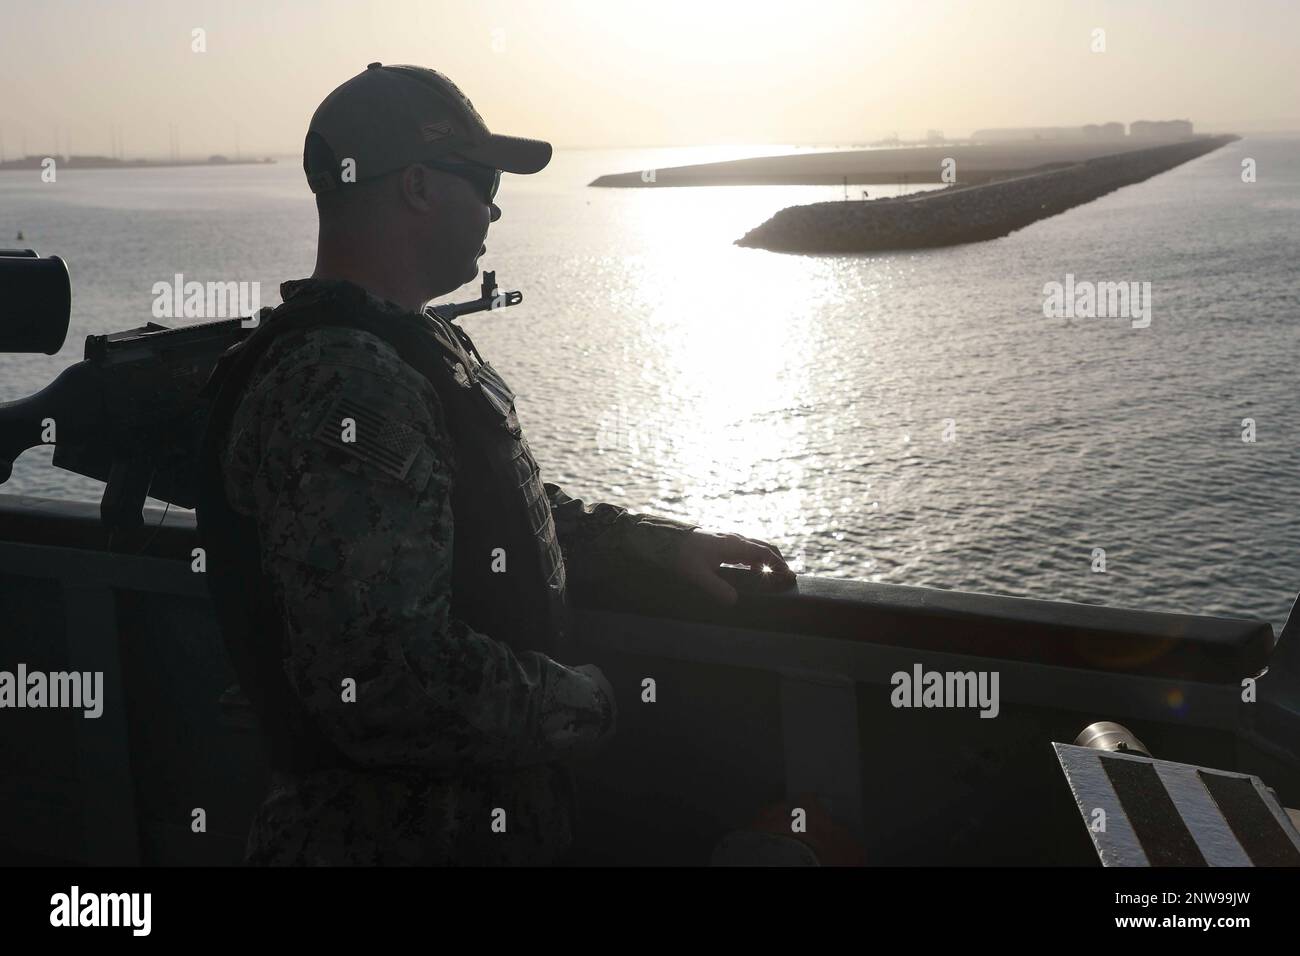 230219-N-JO162-1057 DUQM, Oman (Feb. 19, 2023) Navy Counselor 1st Class Clayton Maxwell, assigned to guided-missile destroyer USS Truxtun (DDG 103), stands watch while departing from Duqm, Oman, Feb. 19, 2023. Truxtun is deployed to the U.S. 5th Fleet area of operations to help ensure maritime security and stability in the Middle East region. Stock Photo